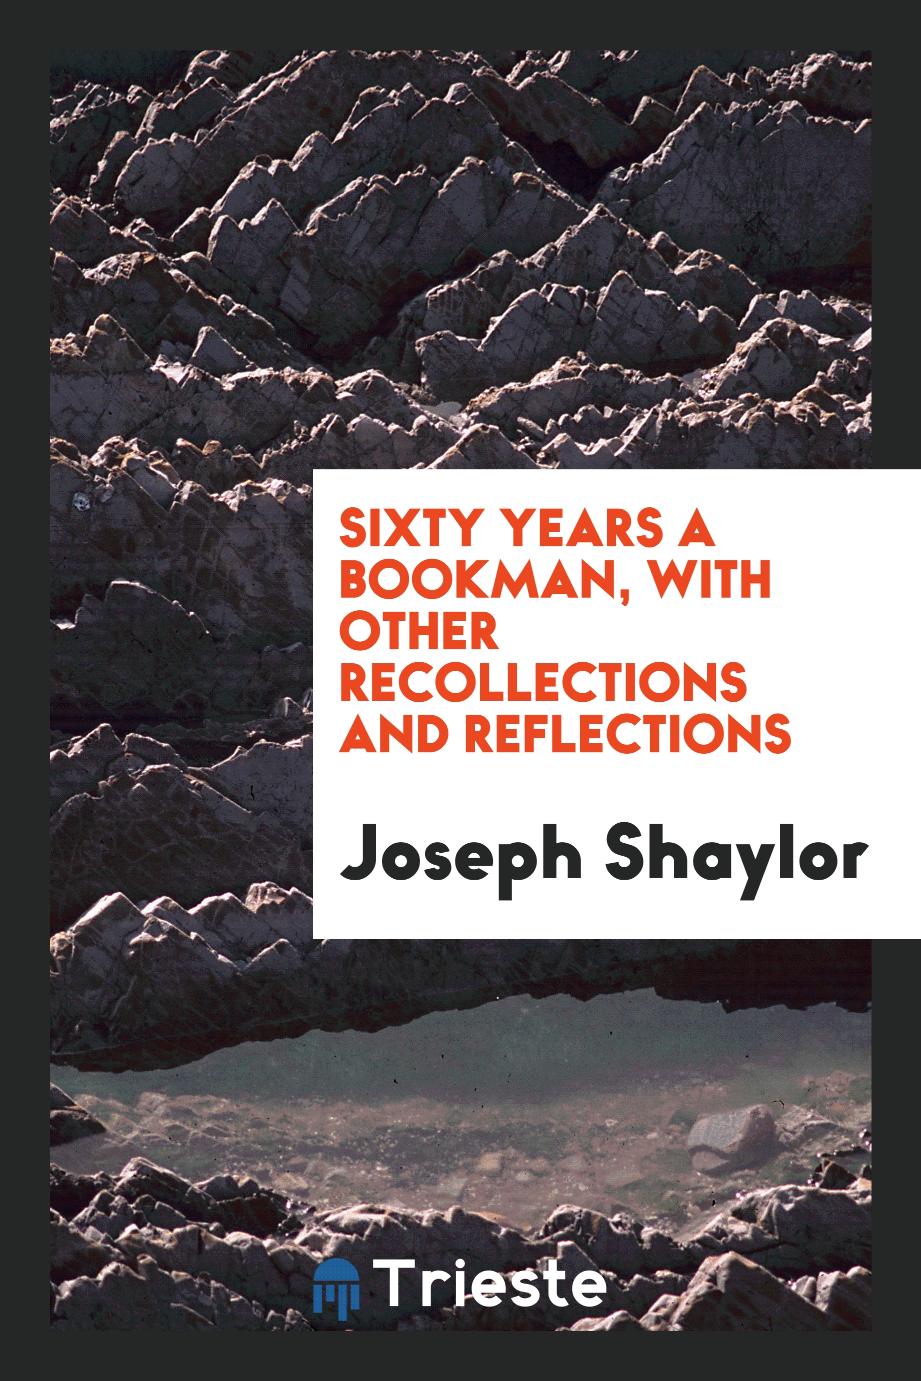 Sixty years a bookman, with other recollections and reflections